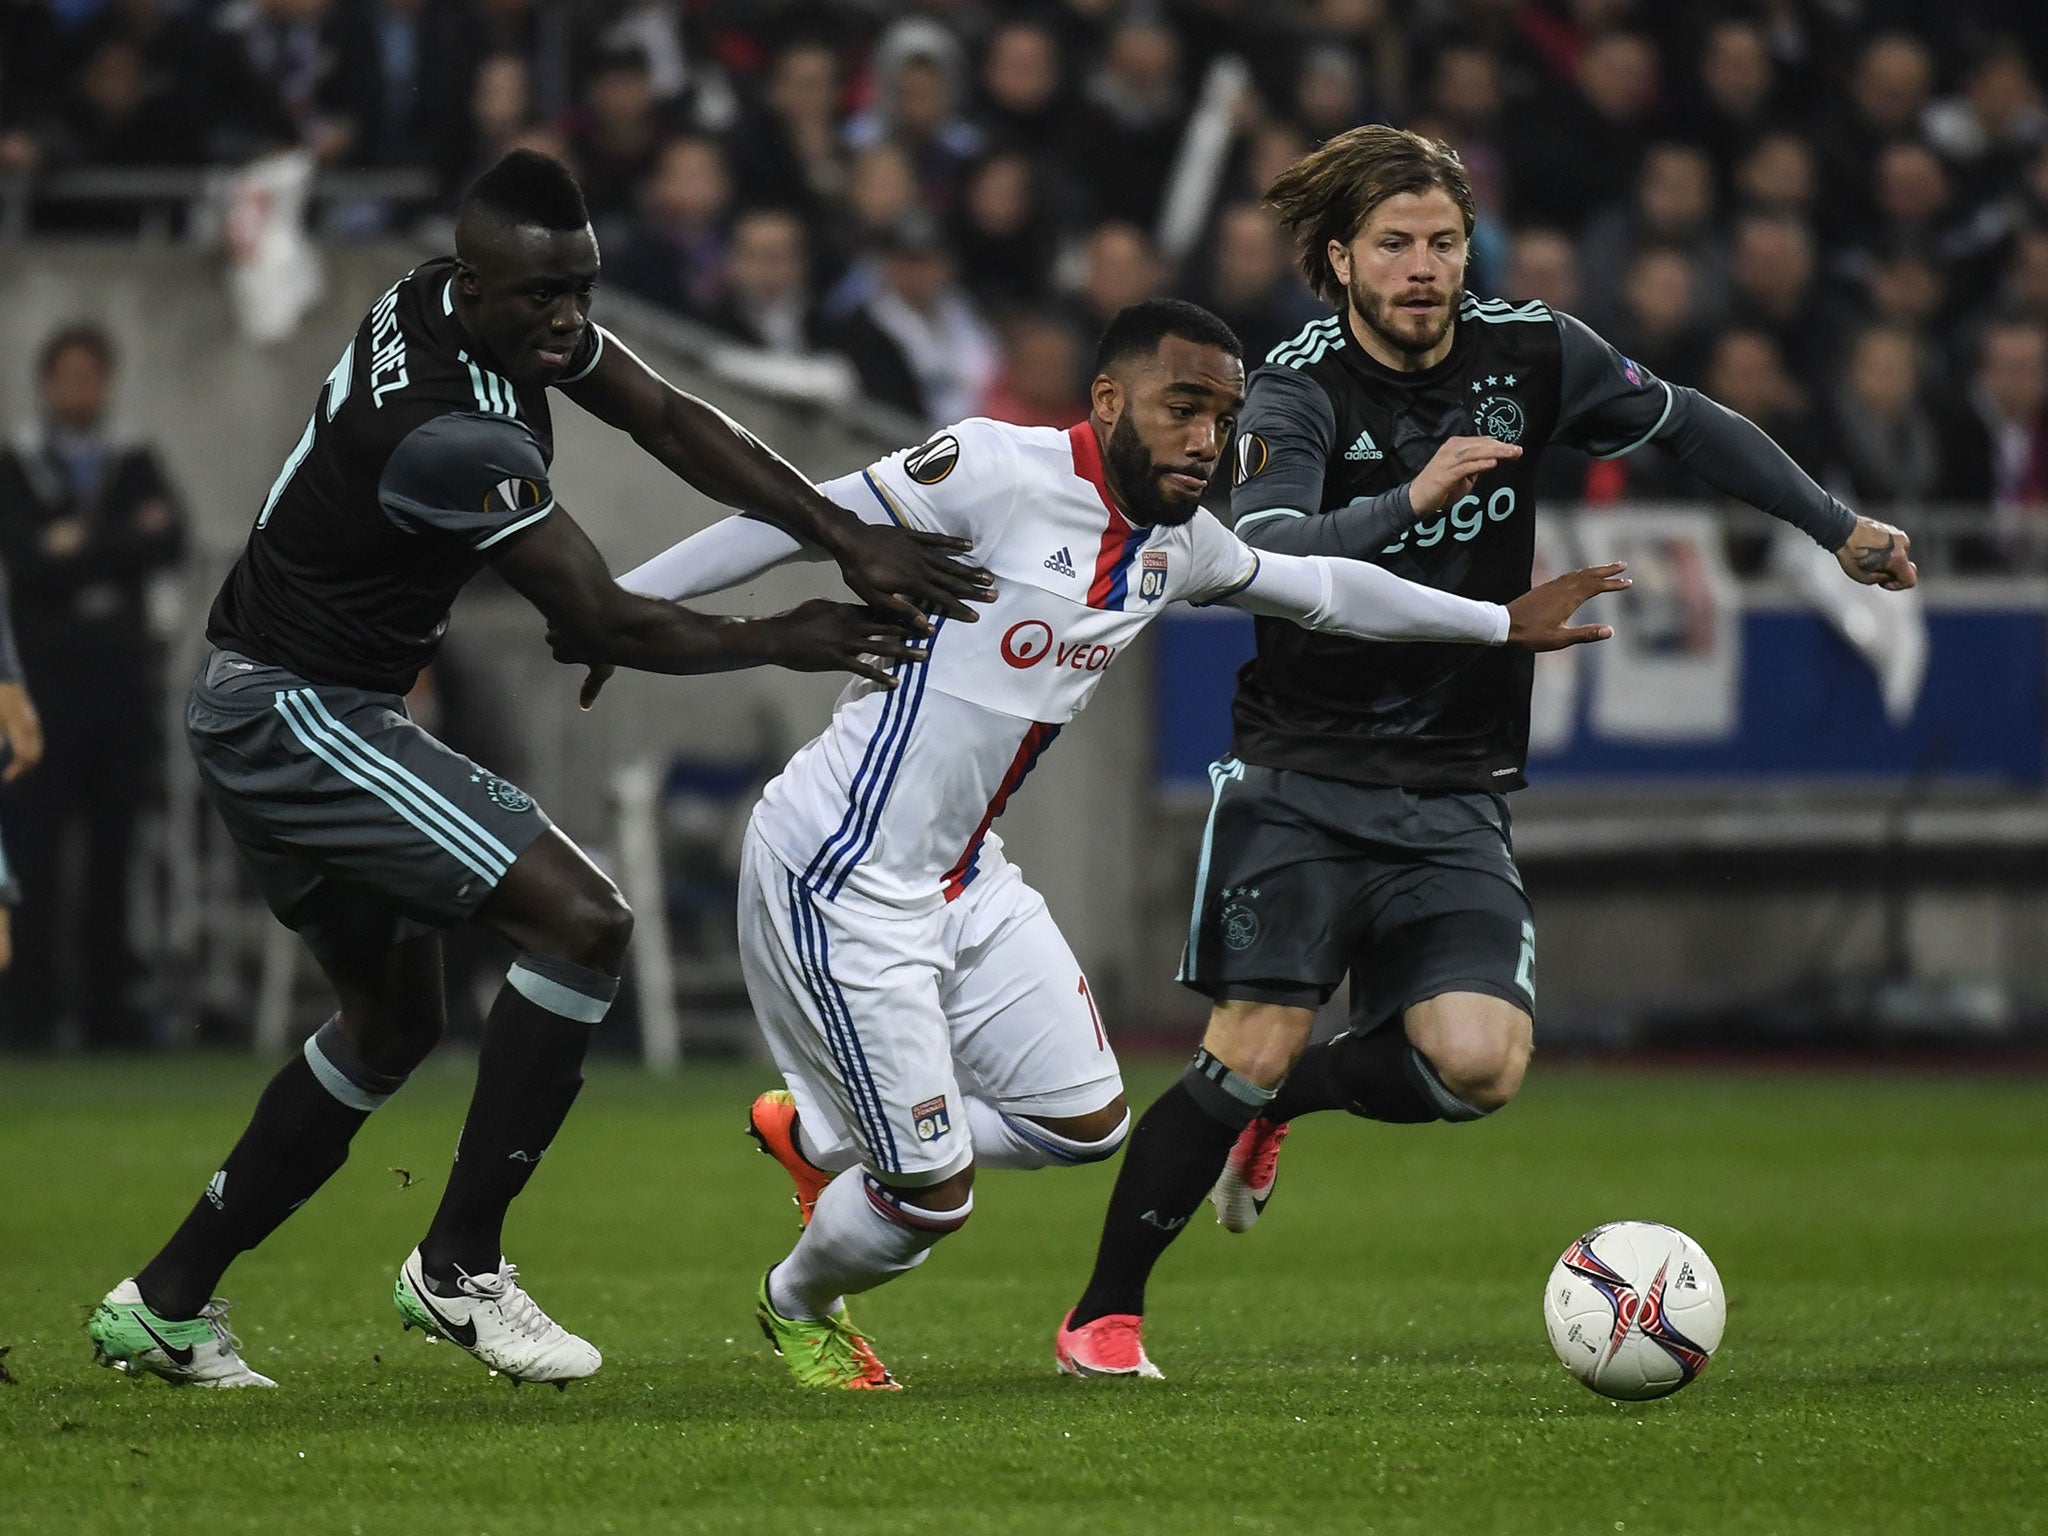 Lacazette will keep defenders busy with his high work-rate